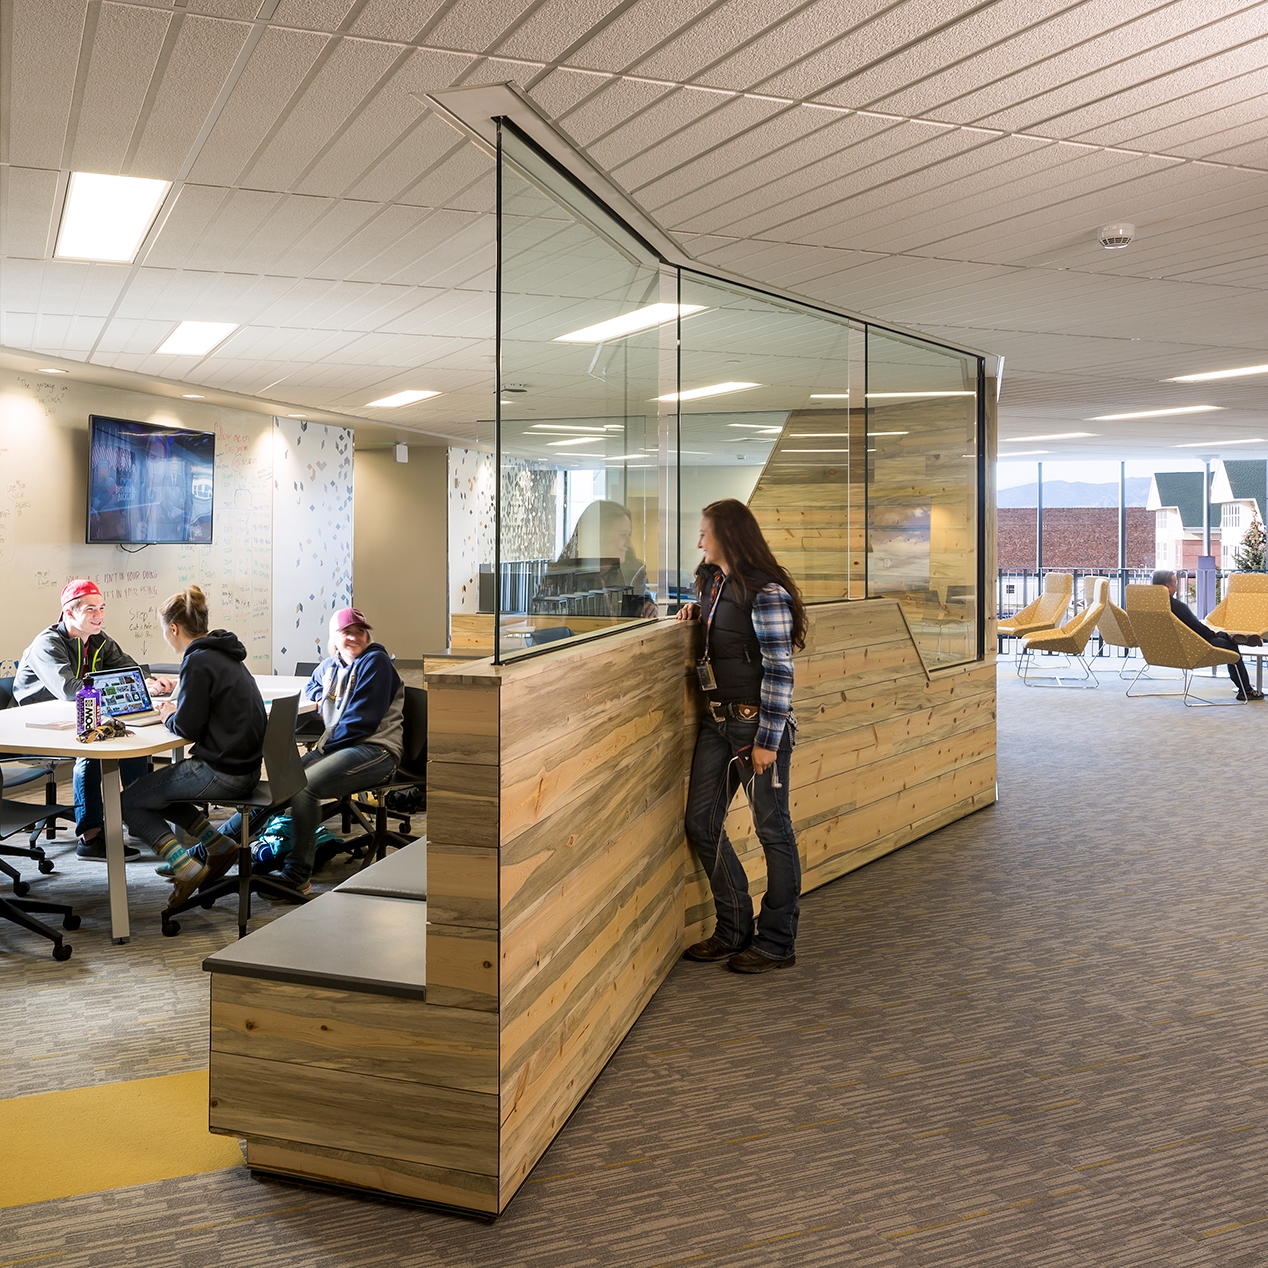 Smaller spaces within each floor's shared community area are
separated by large glass partitions, which allow students passing by to observe
their peers socializing or studying.